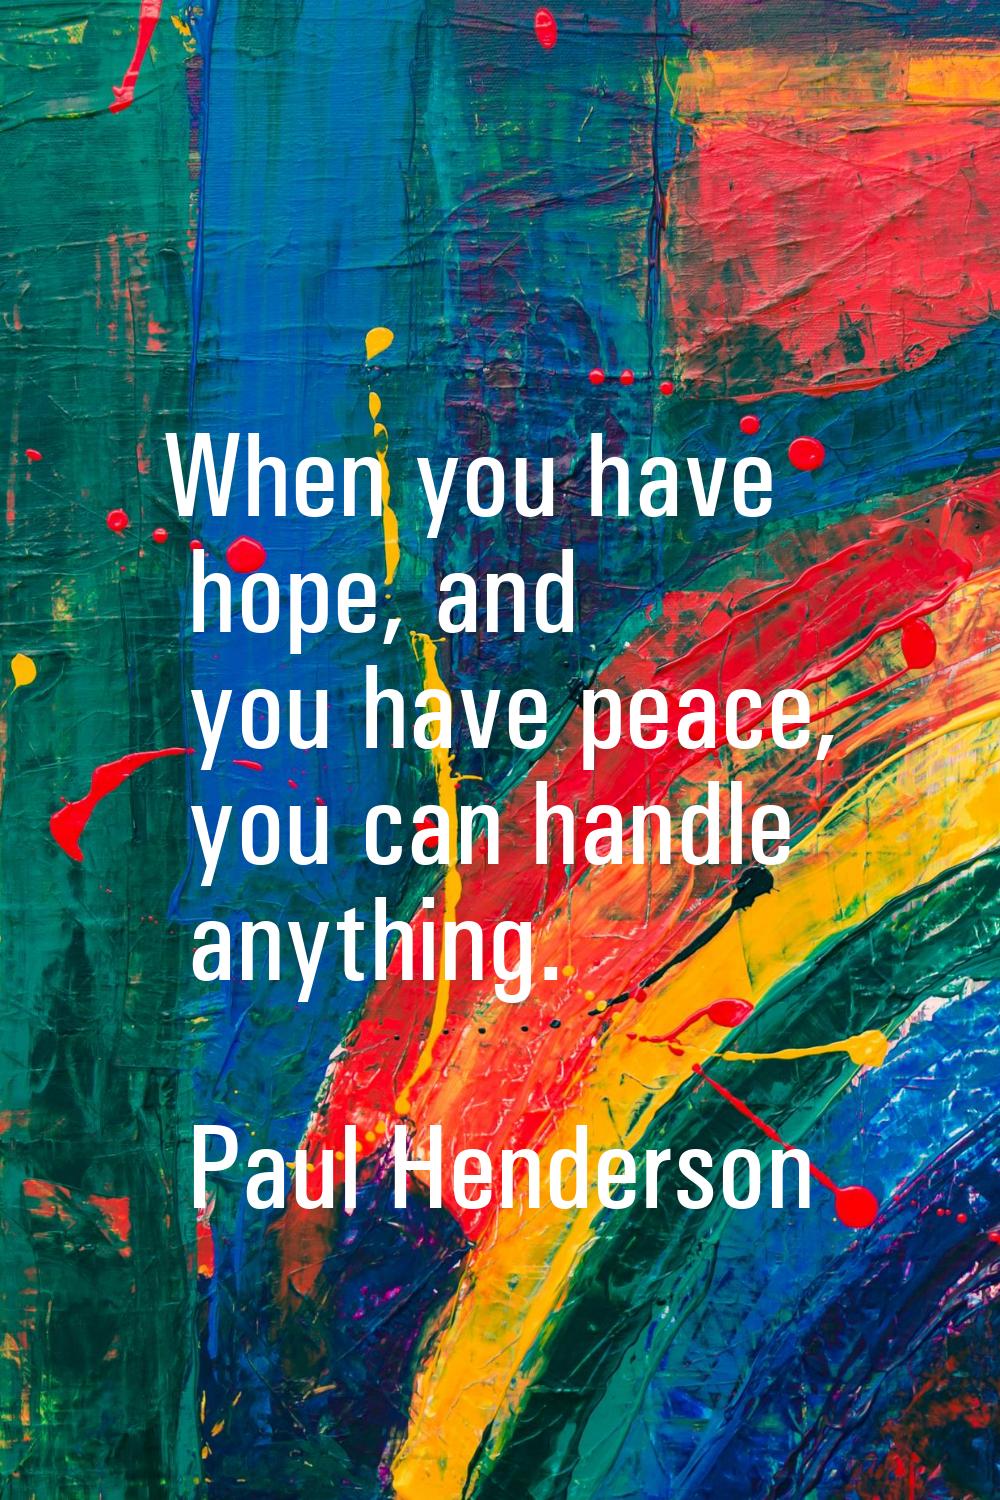 When you have hope, and you have peace, you can handle anything.